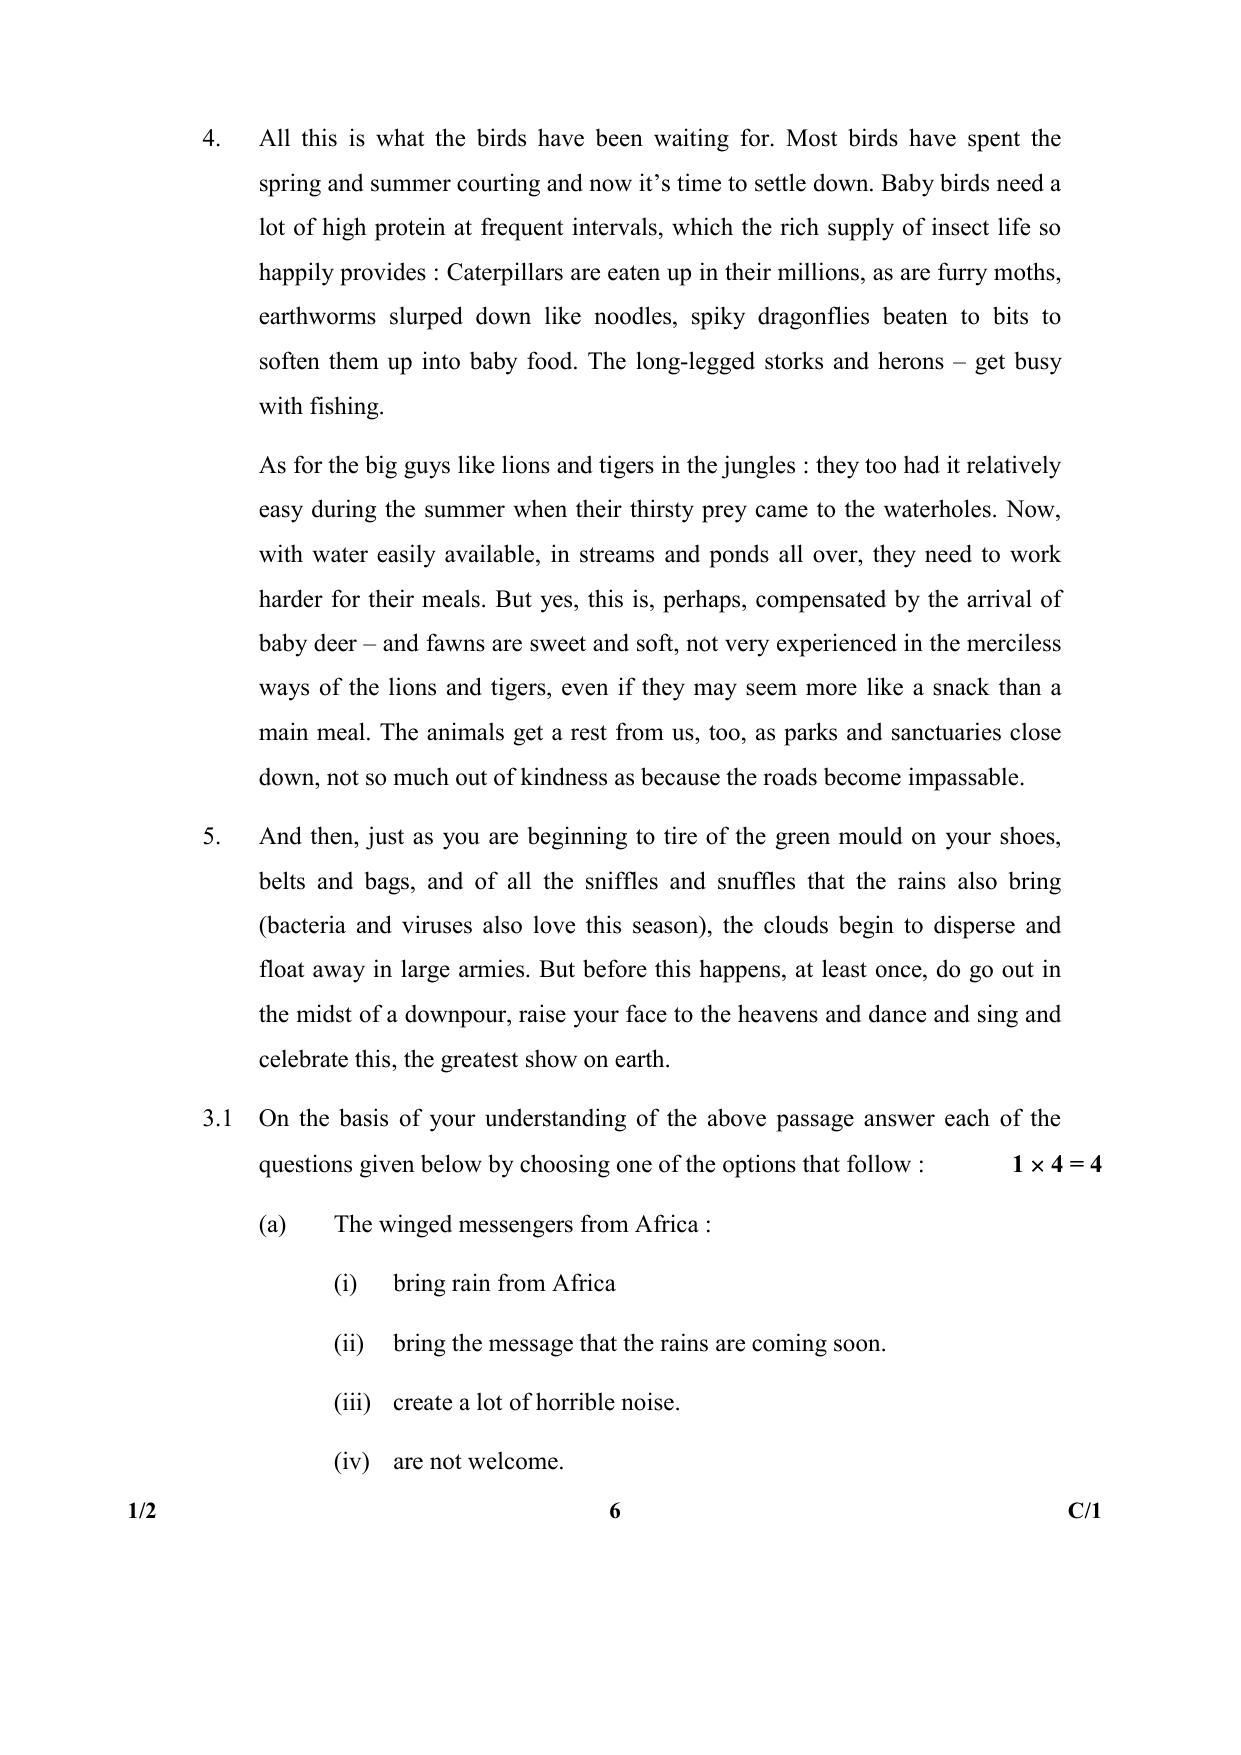 CBSE Class 12 1-2(English Core) 2018 Compartment Question Paper - Page 6